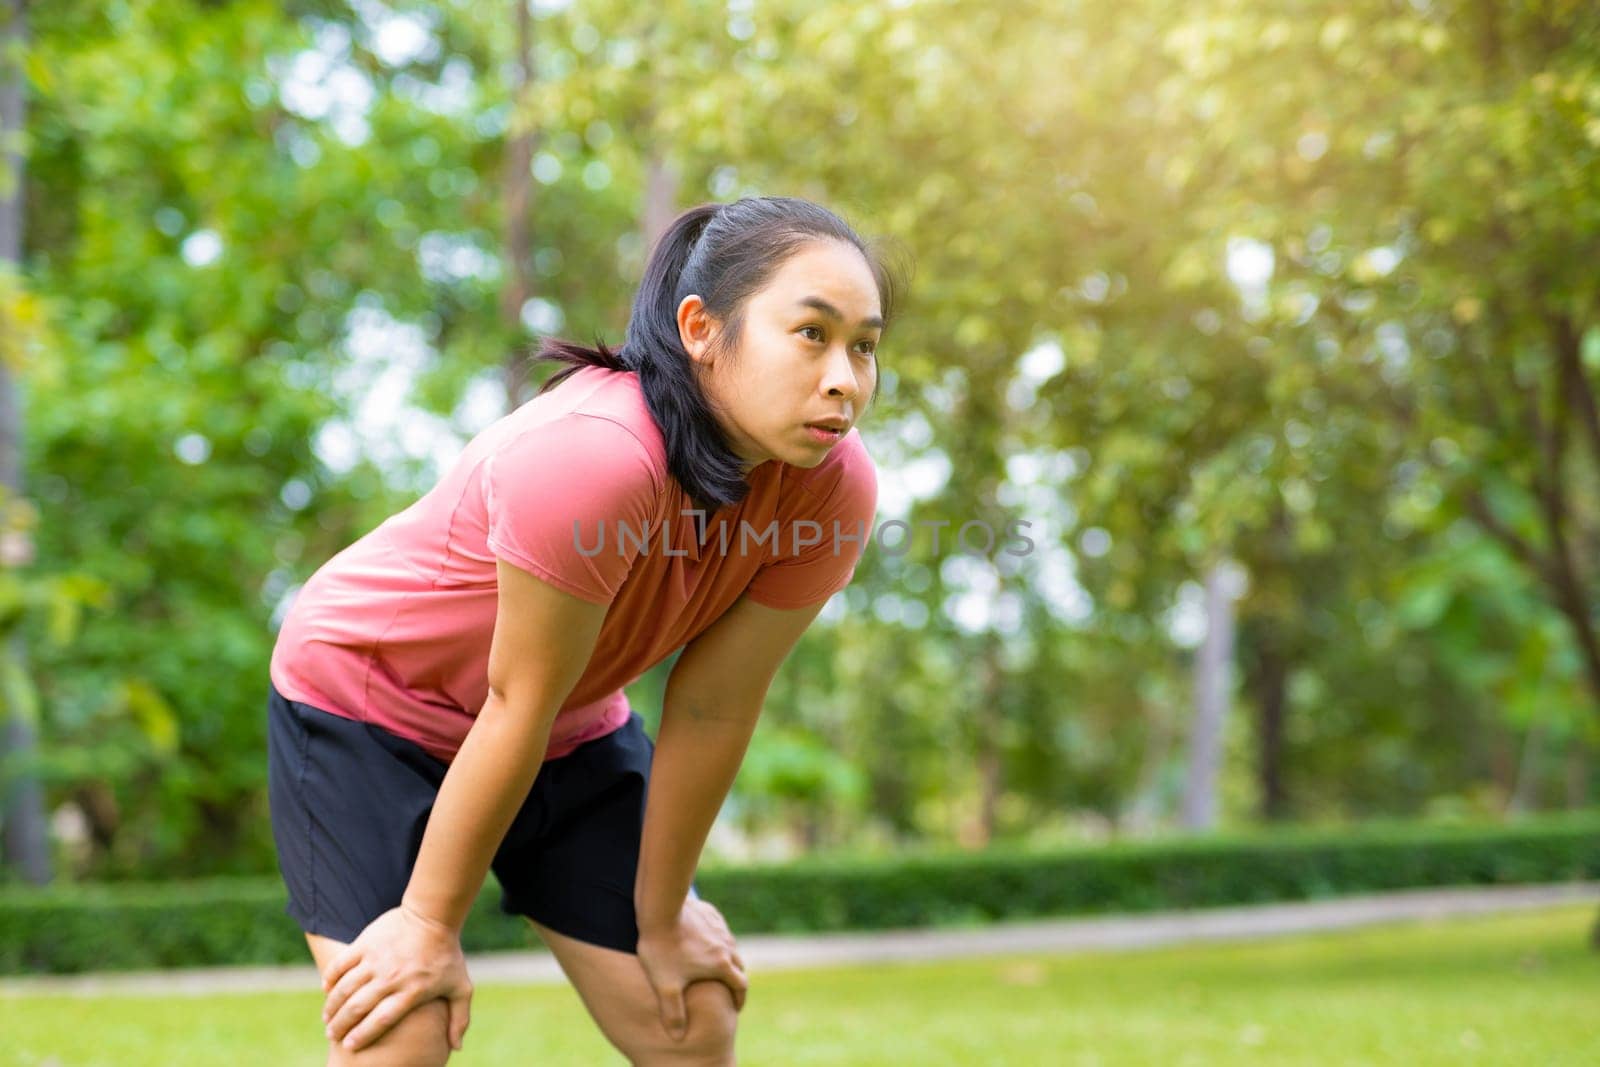 Young Asian woman standing bent over and breathing after running in the park. Young healthy woman taking a break after running. Healthy lifestyle concept.